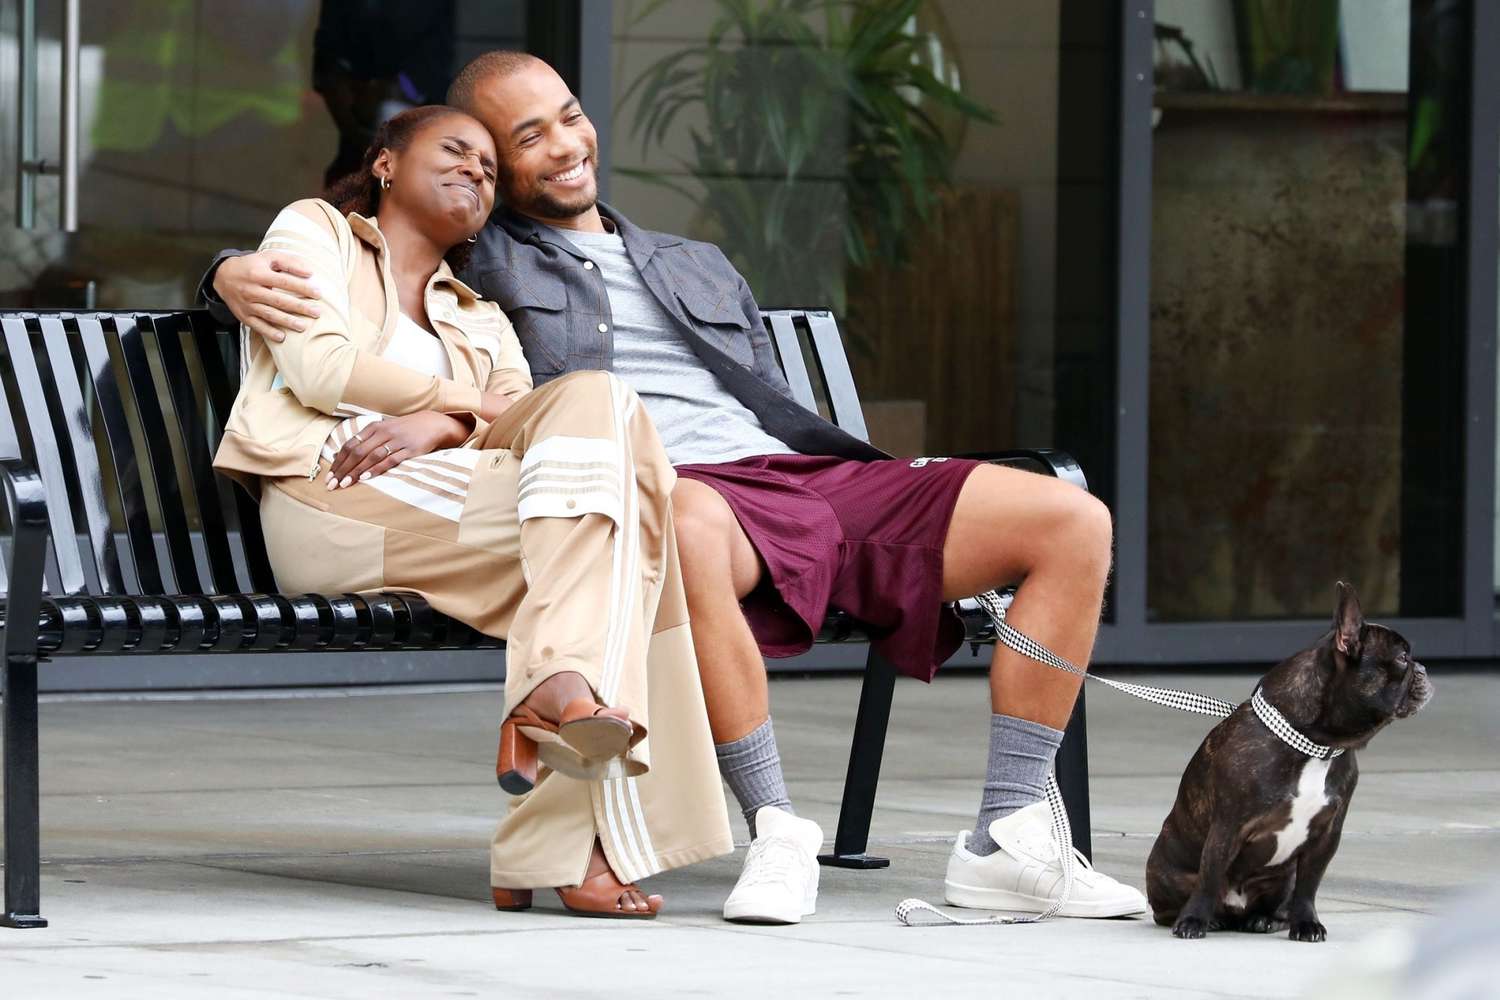 Issa Rae and Kendrick Sampson get cozy filming a scene for 'Insecure'